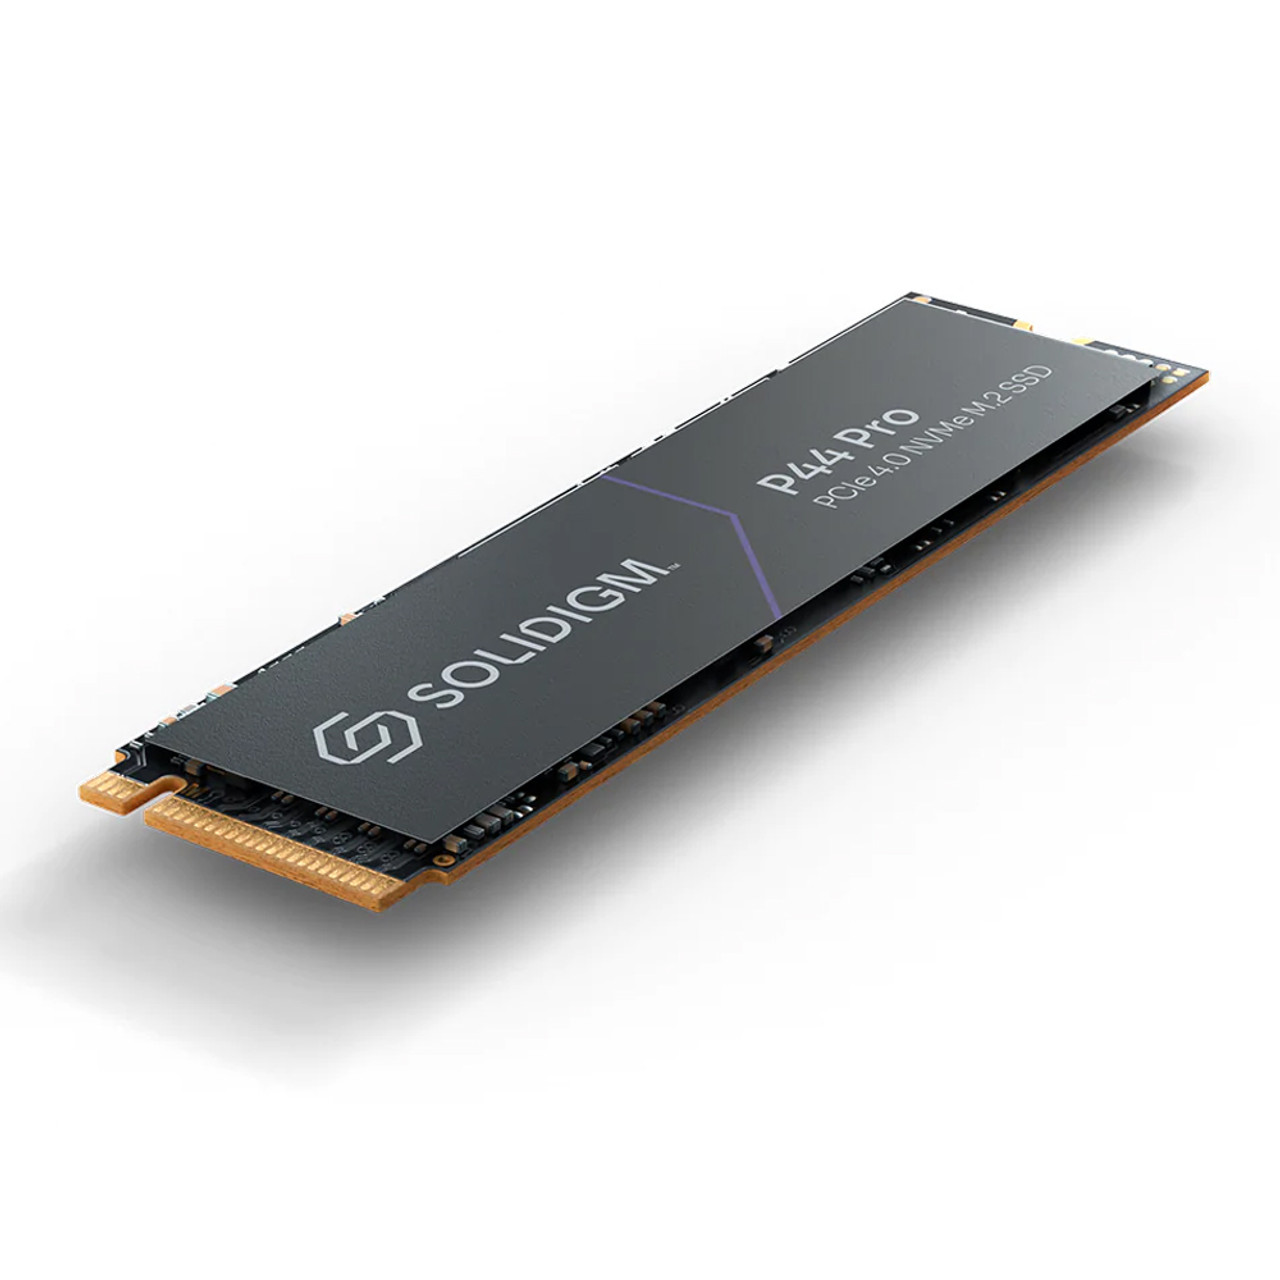 Solidigm SSDPFKKW512H7X1 P44 Pro 512GB M.2 2280 PCIe GEN 4 NVMe 4.0 x4  Internal Solid-State Drive, Speed up to 7000MB/s